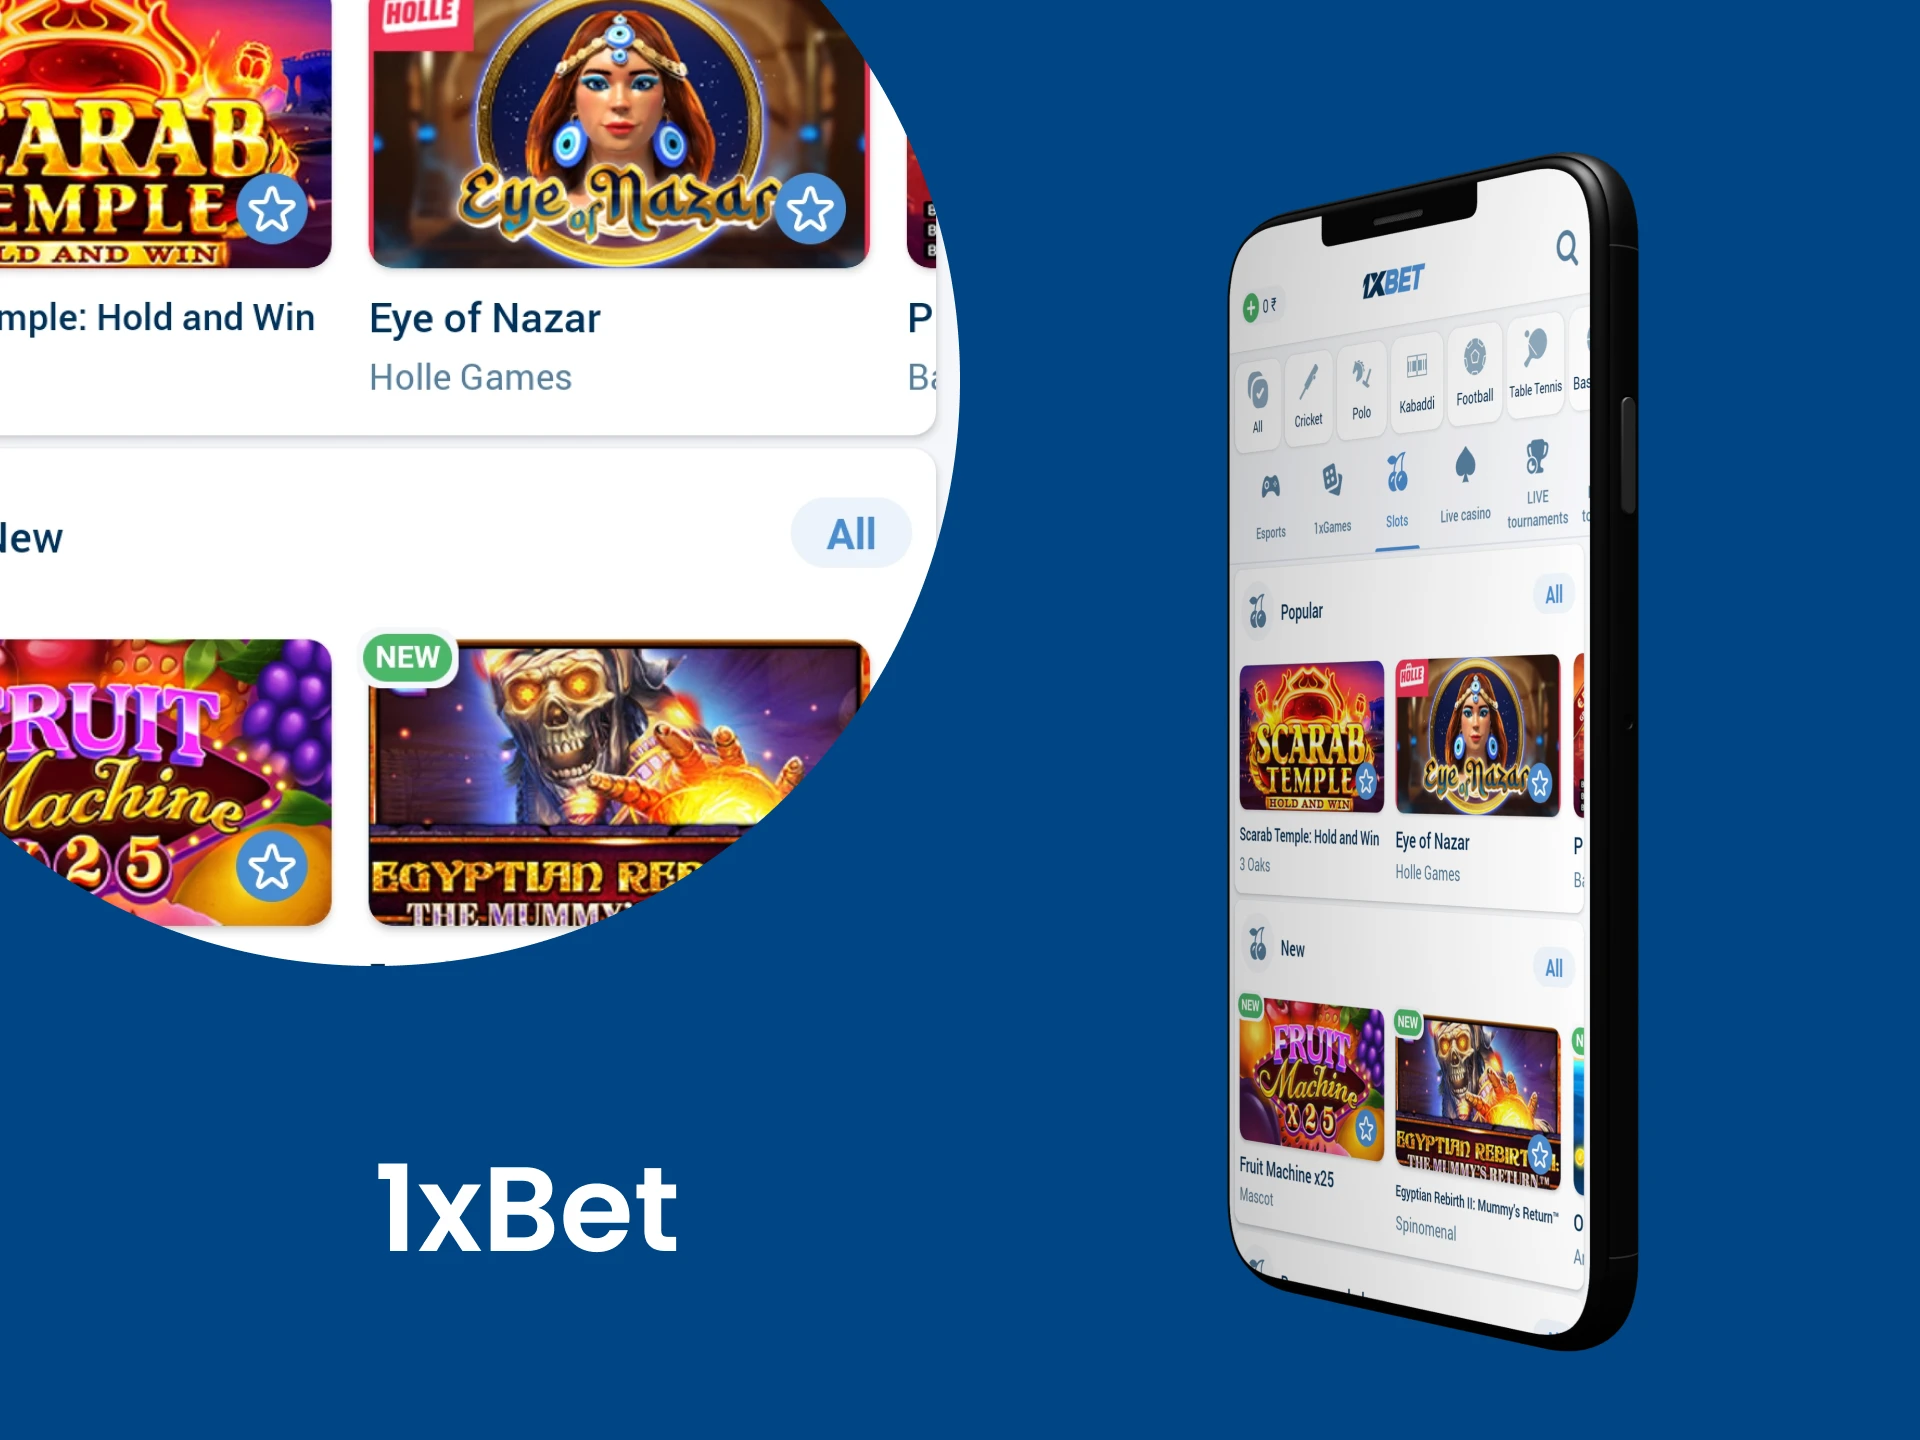 Download the 1xbet app for casino games.